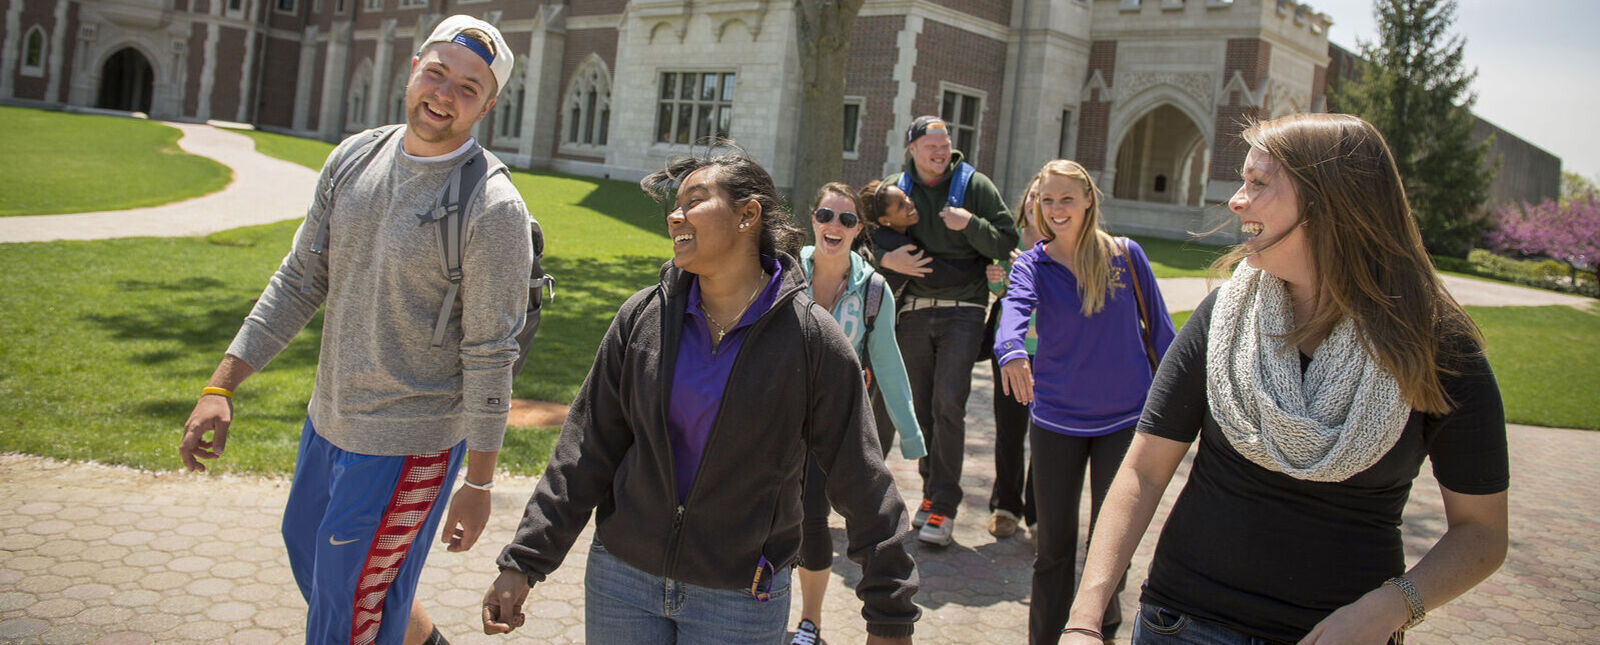 A group of students smile and laugh as they walk across the Elmira College campus